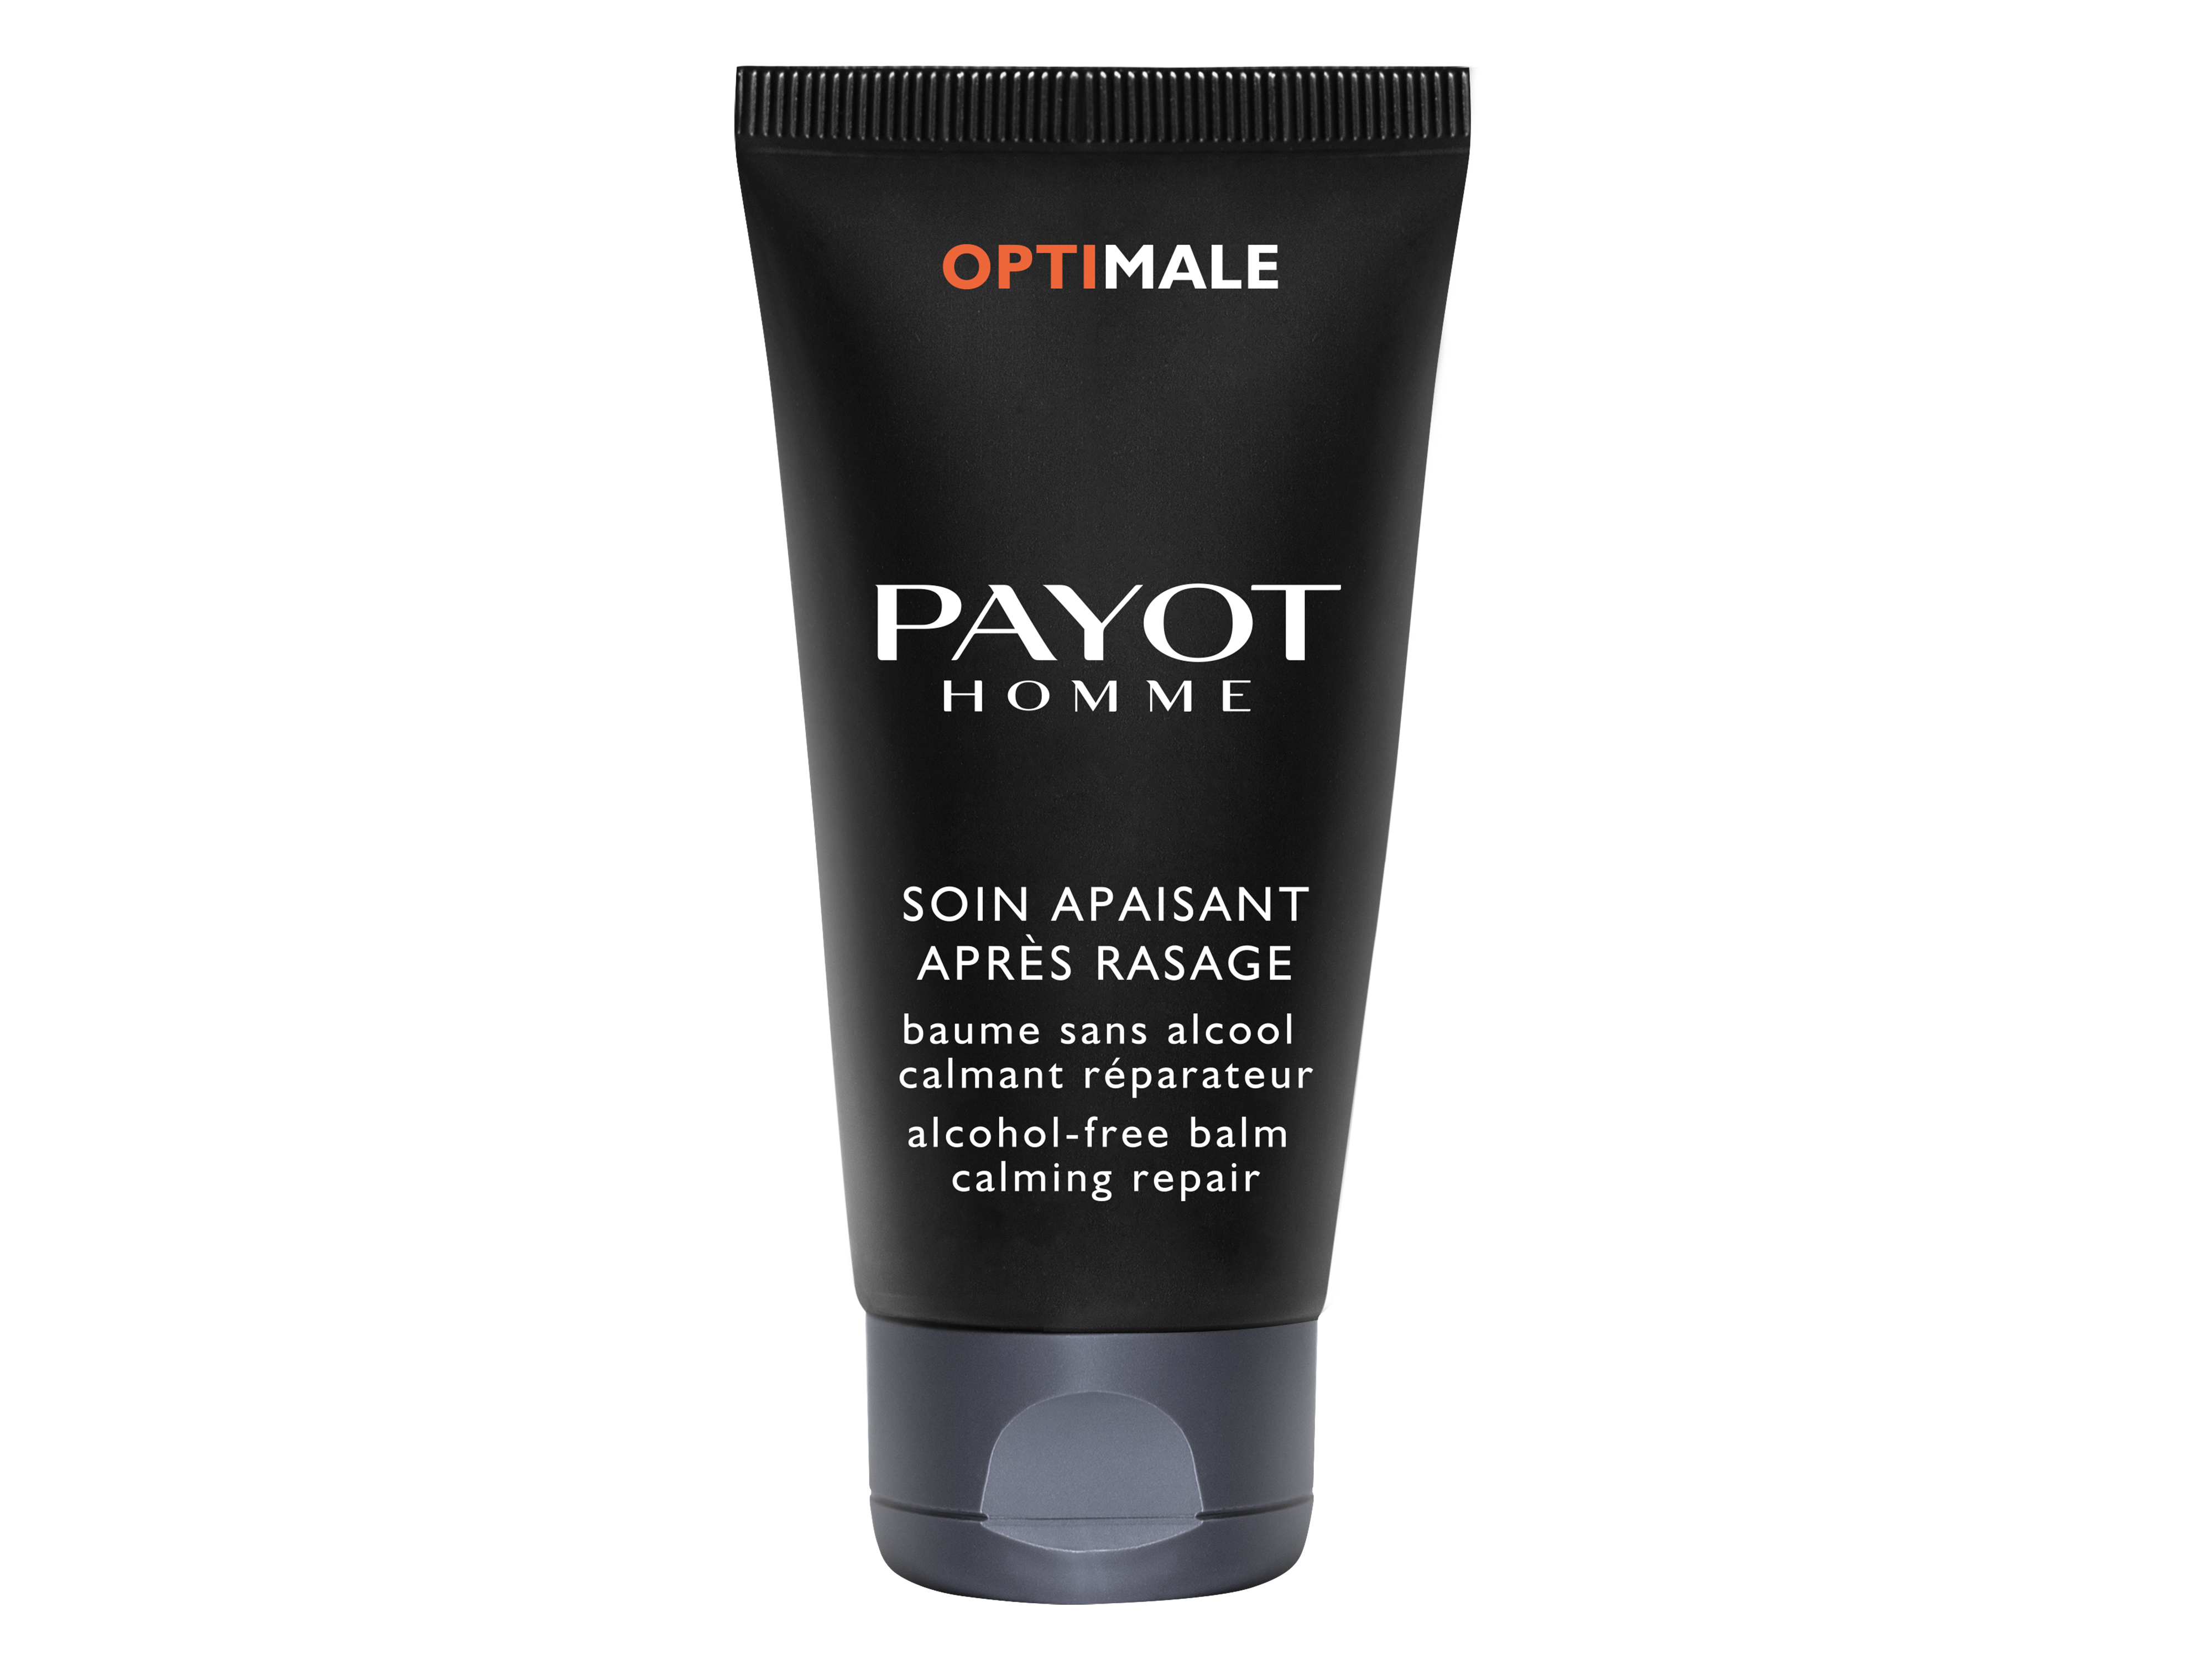 Payot Homme Optimale Soin Apaisant Apres Rasage, 50 ml